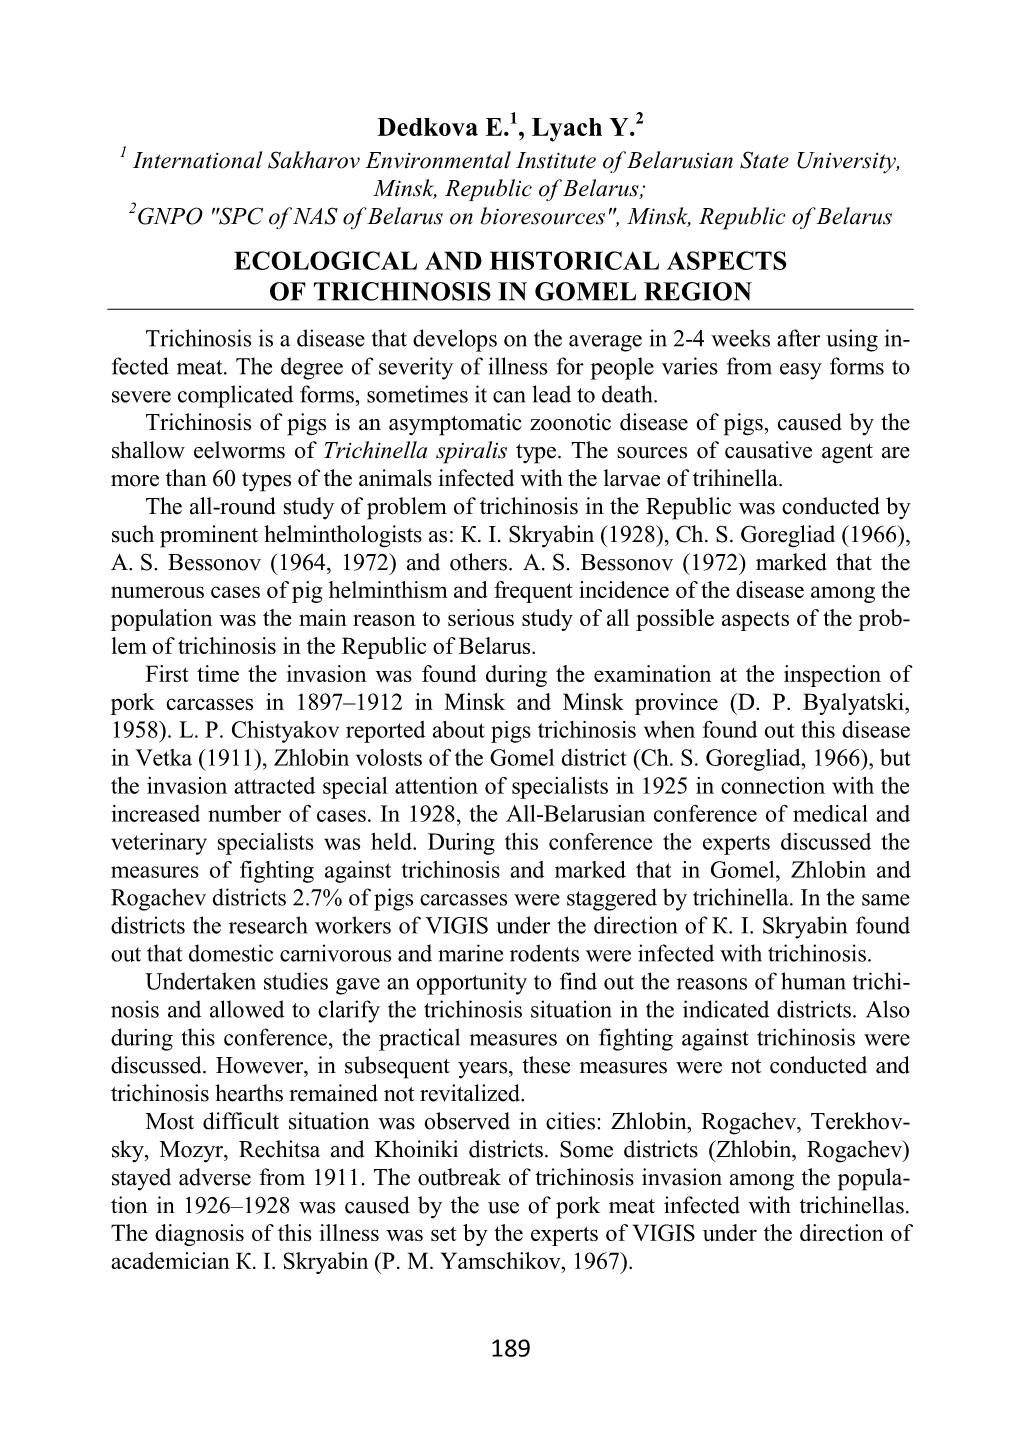 Dedkova E.1, Lyach Y.2 ECOLOGICAL and HISTORICAL